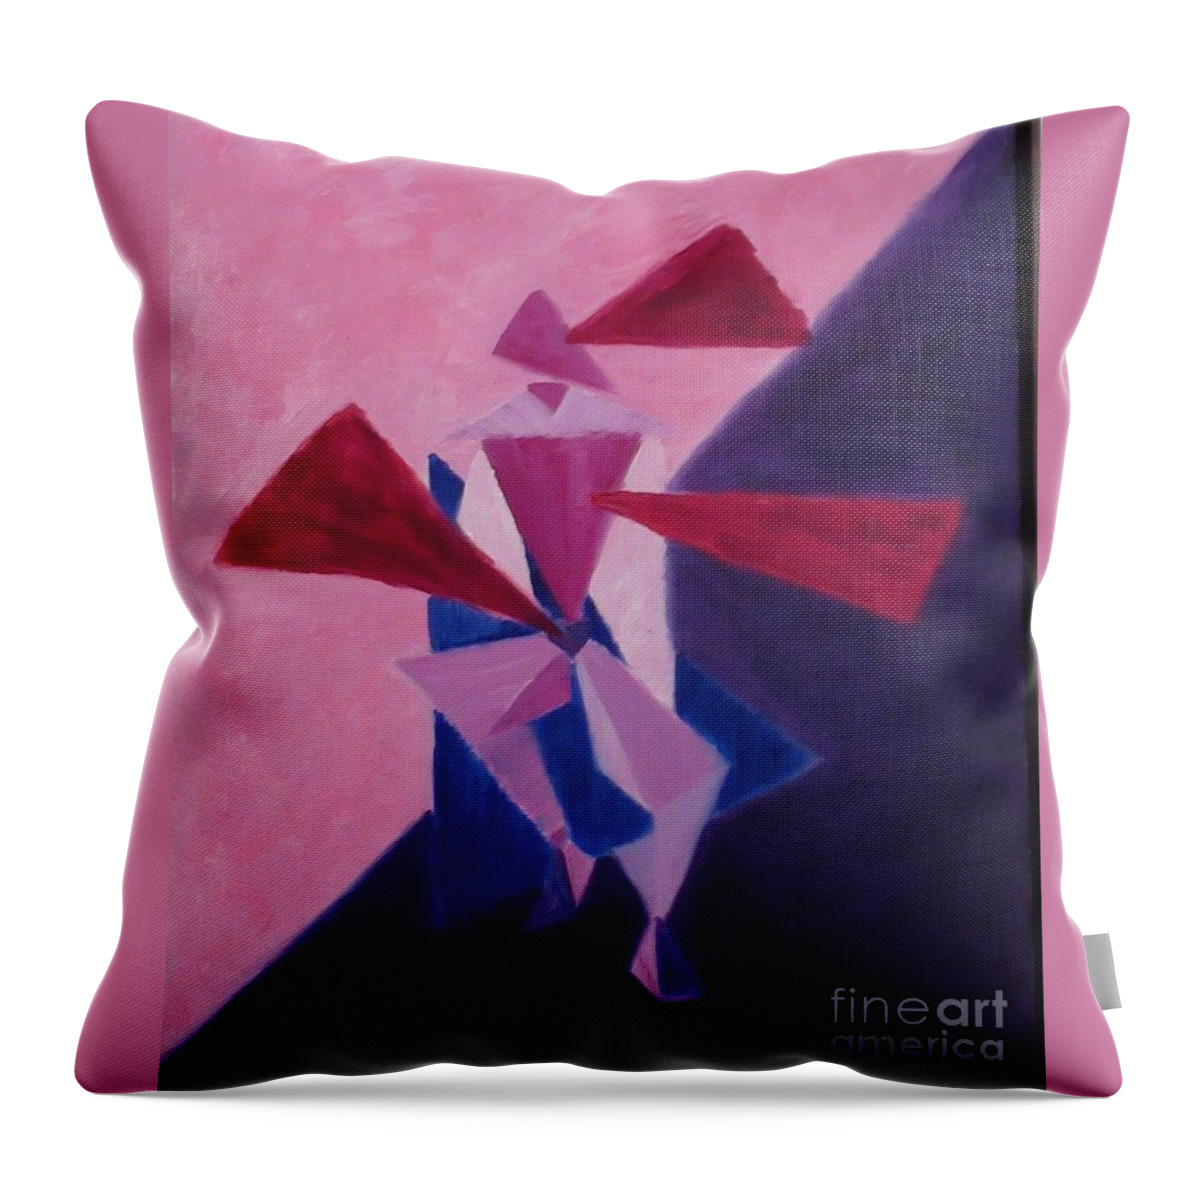 Abstract Throw Pillow featuring the painting Triangles by Karen Francis